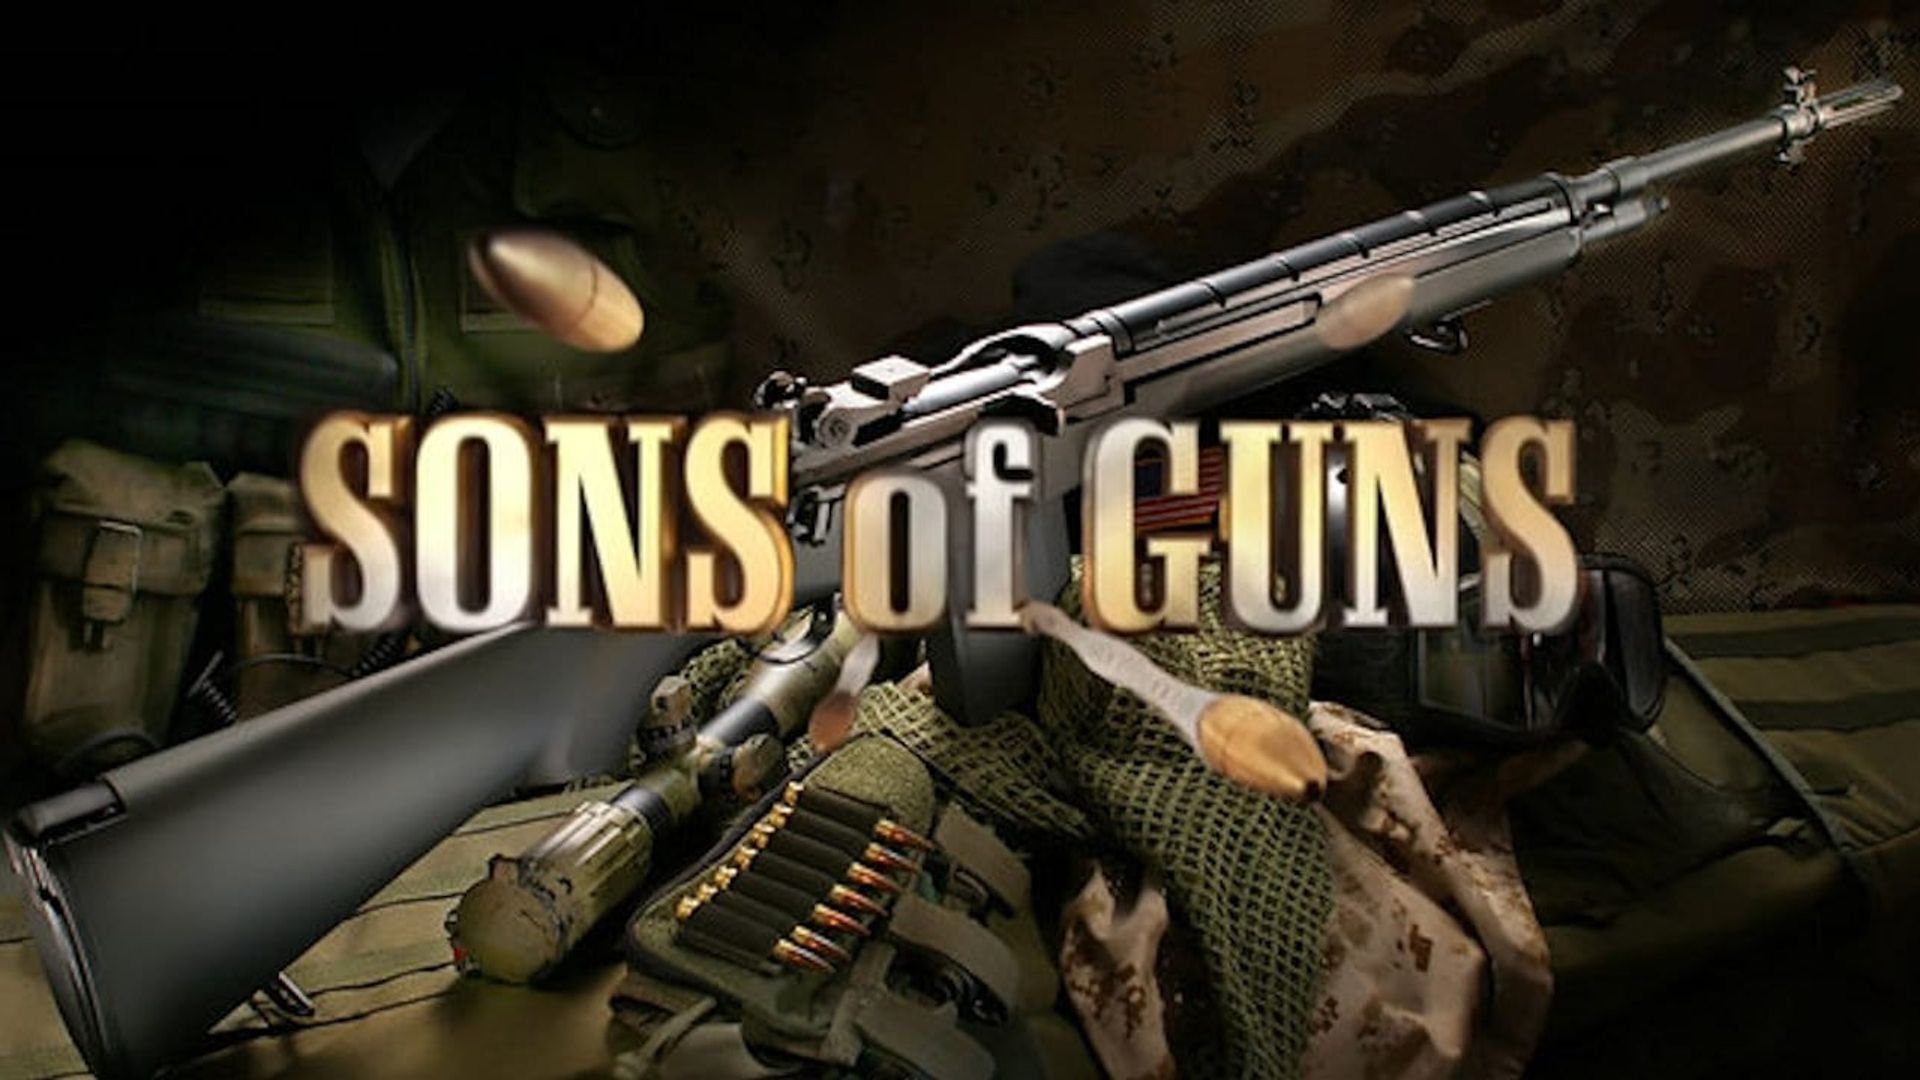 Sons of Guns background